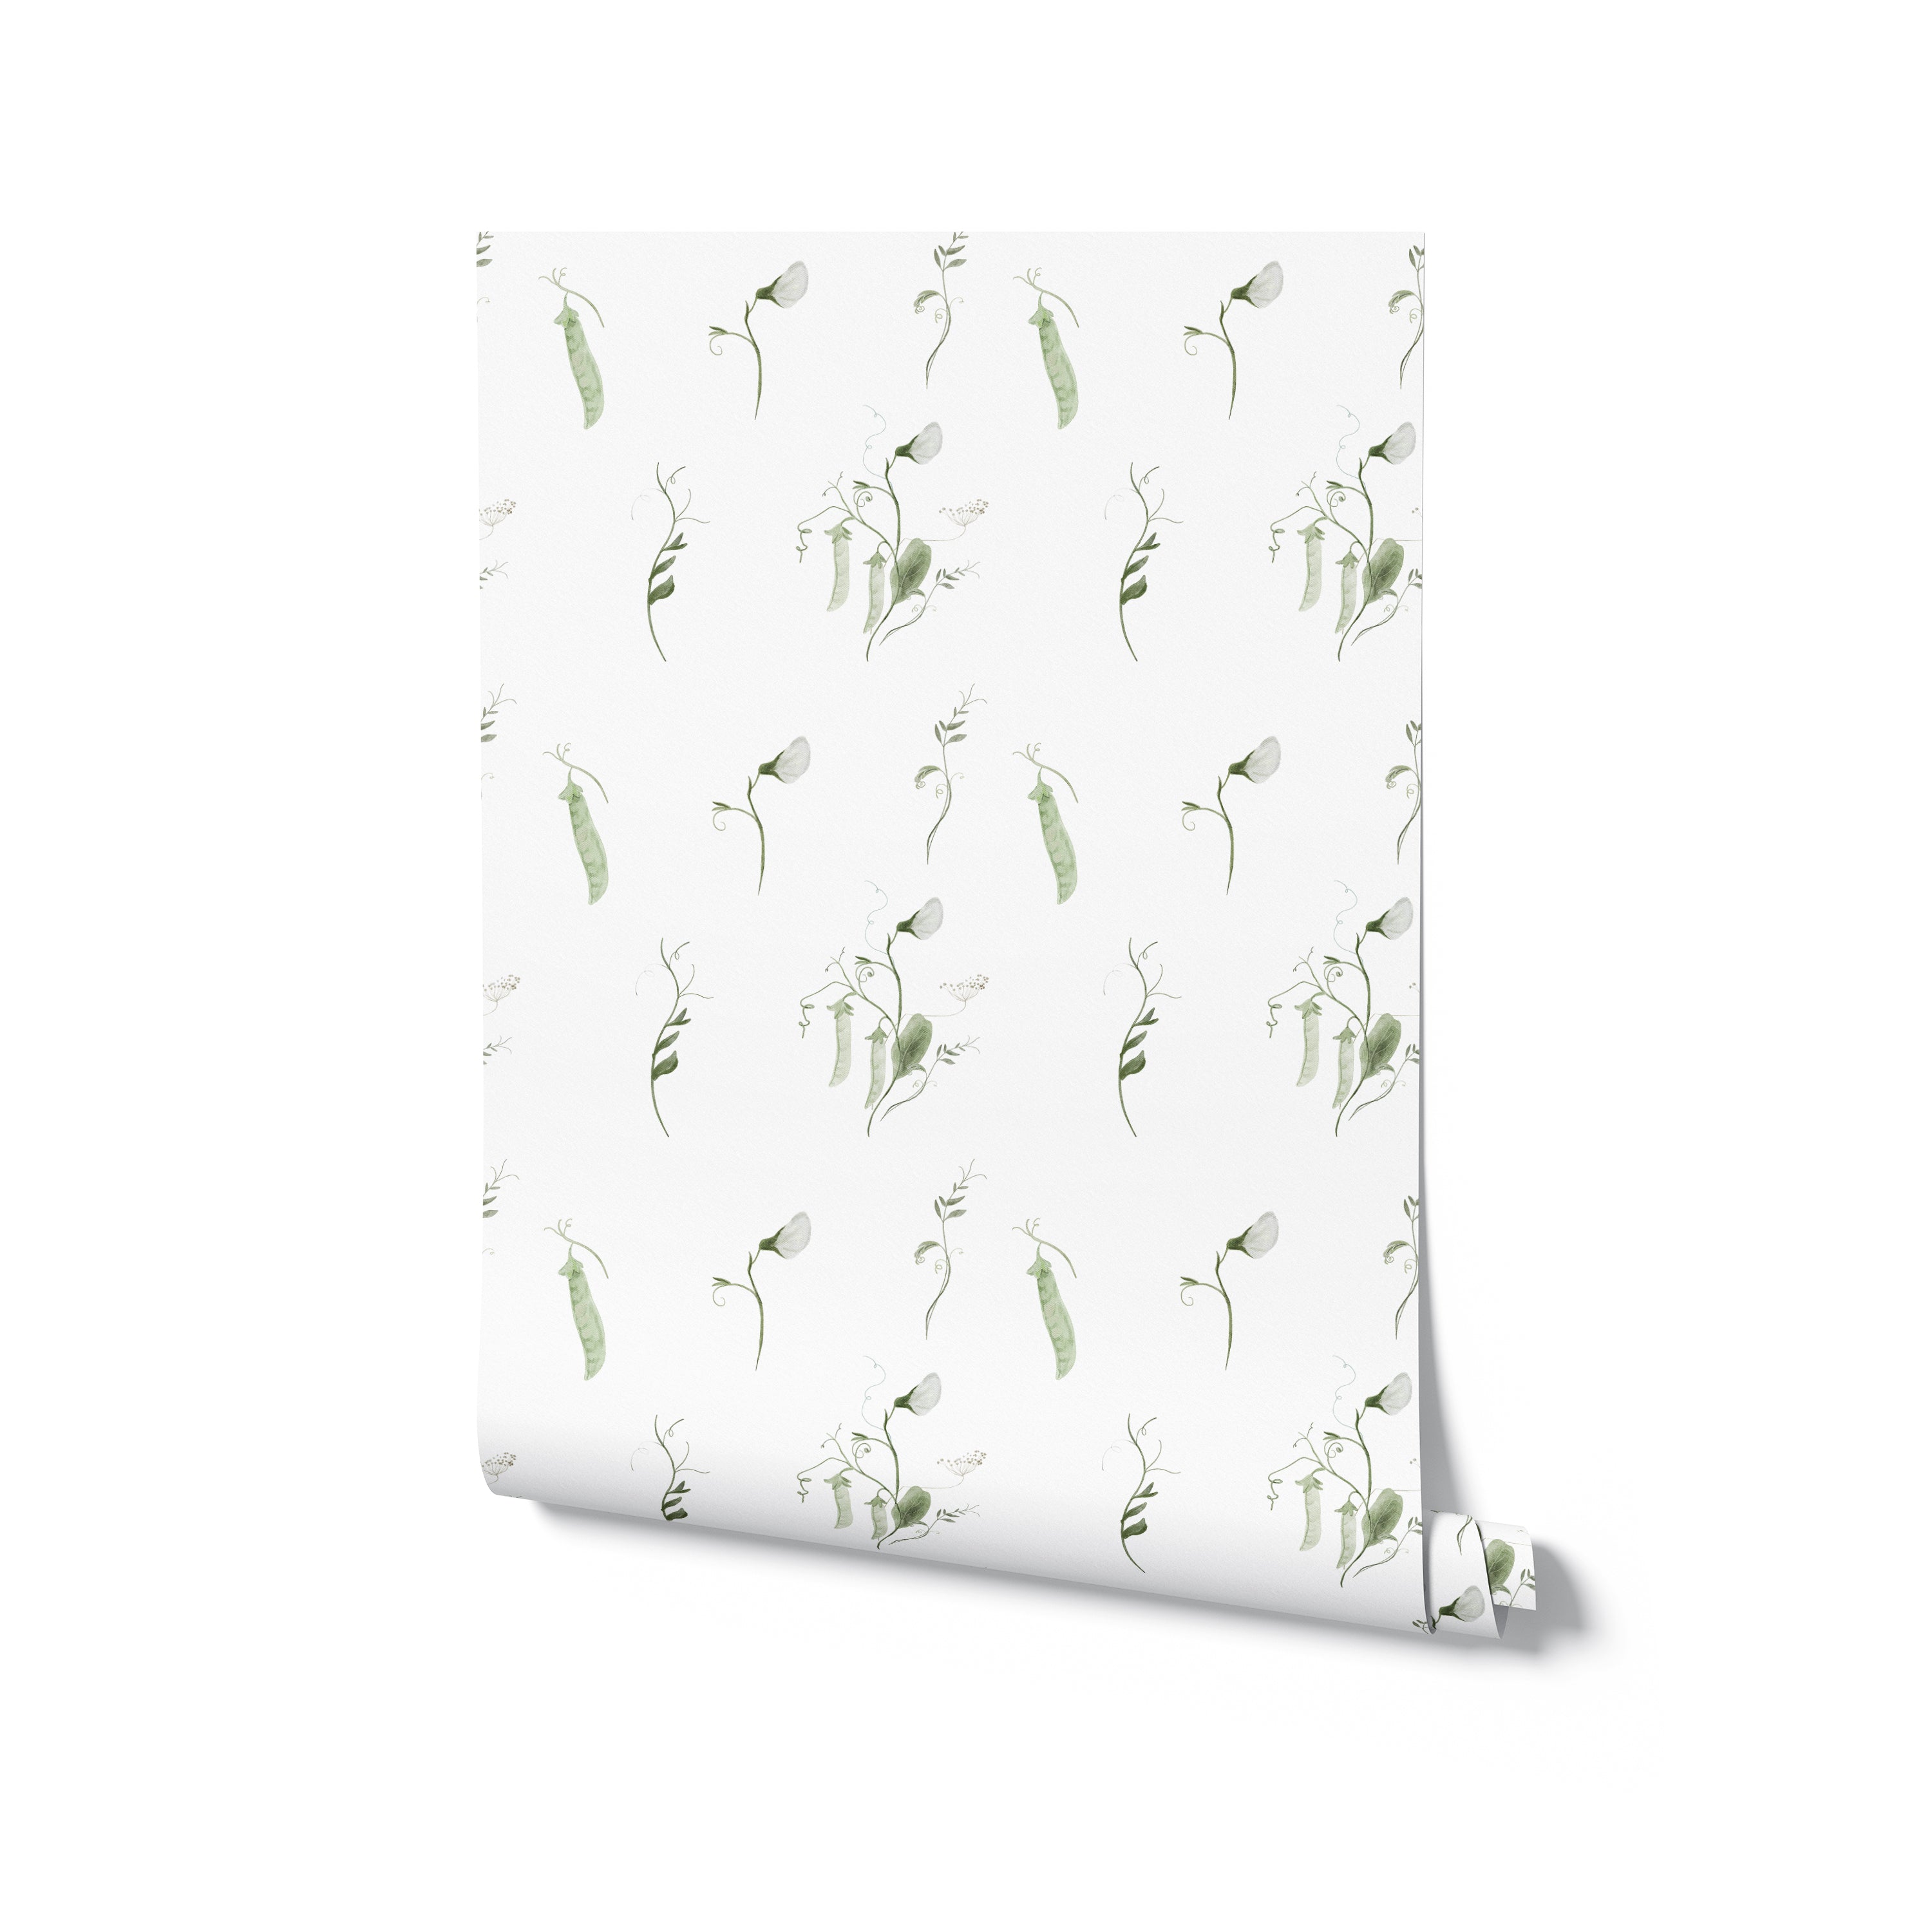 A roll of snow pea wallpaper showing a continuous pattern of elegantly depicted snow peas and tiny flowers in soft, watercolor green hues, designed for a fresh and organic look.